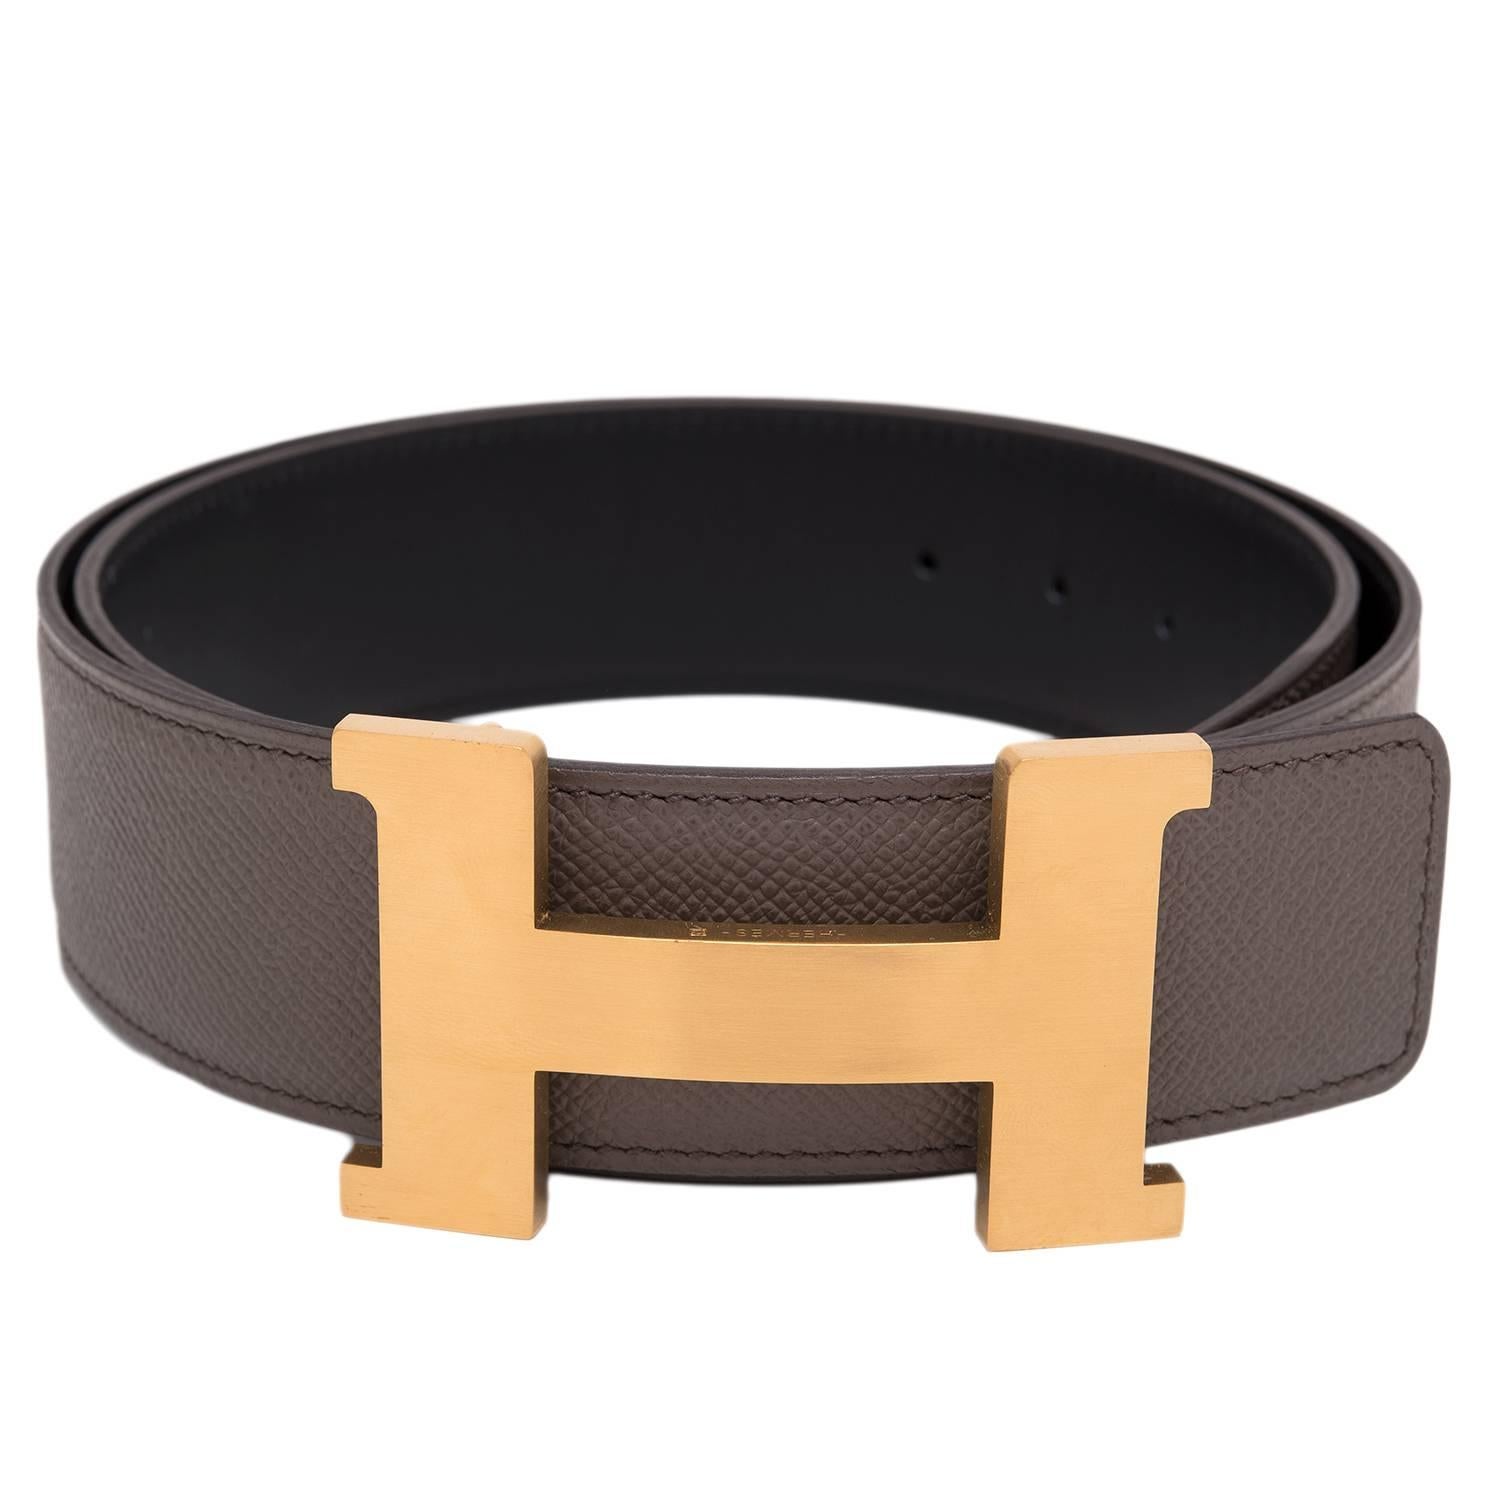 Hermes belt kit comprising an adjustable wide 42mm Constance H belt of Etain epsom with tonal stitching reversing to black calfskin with tonal stitching accompanied by a removable brushed gold H buckle.

Origin: France

Condition: Pristine,